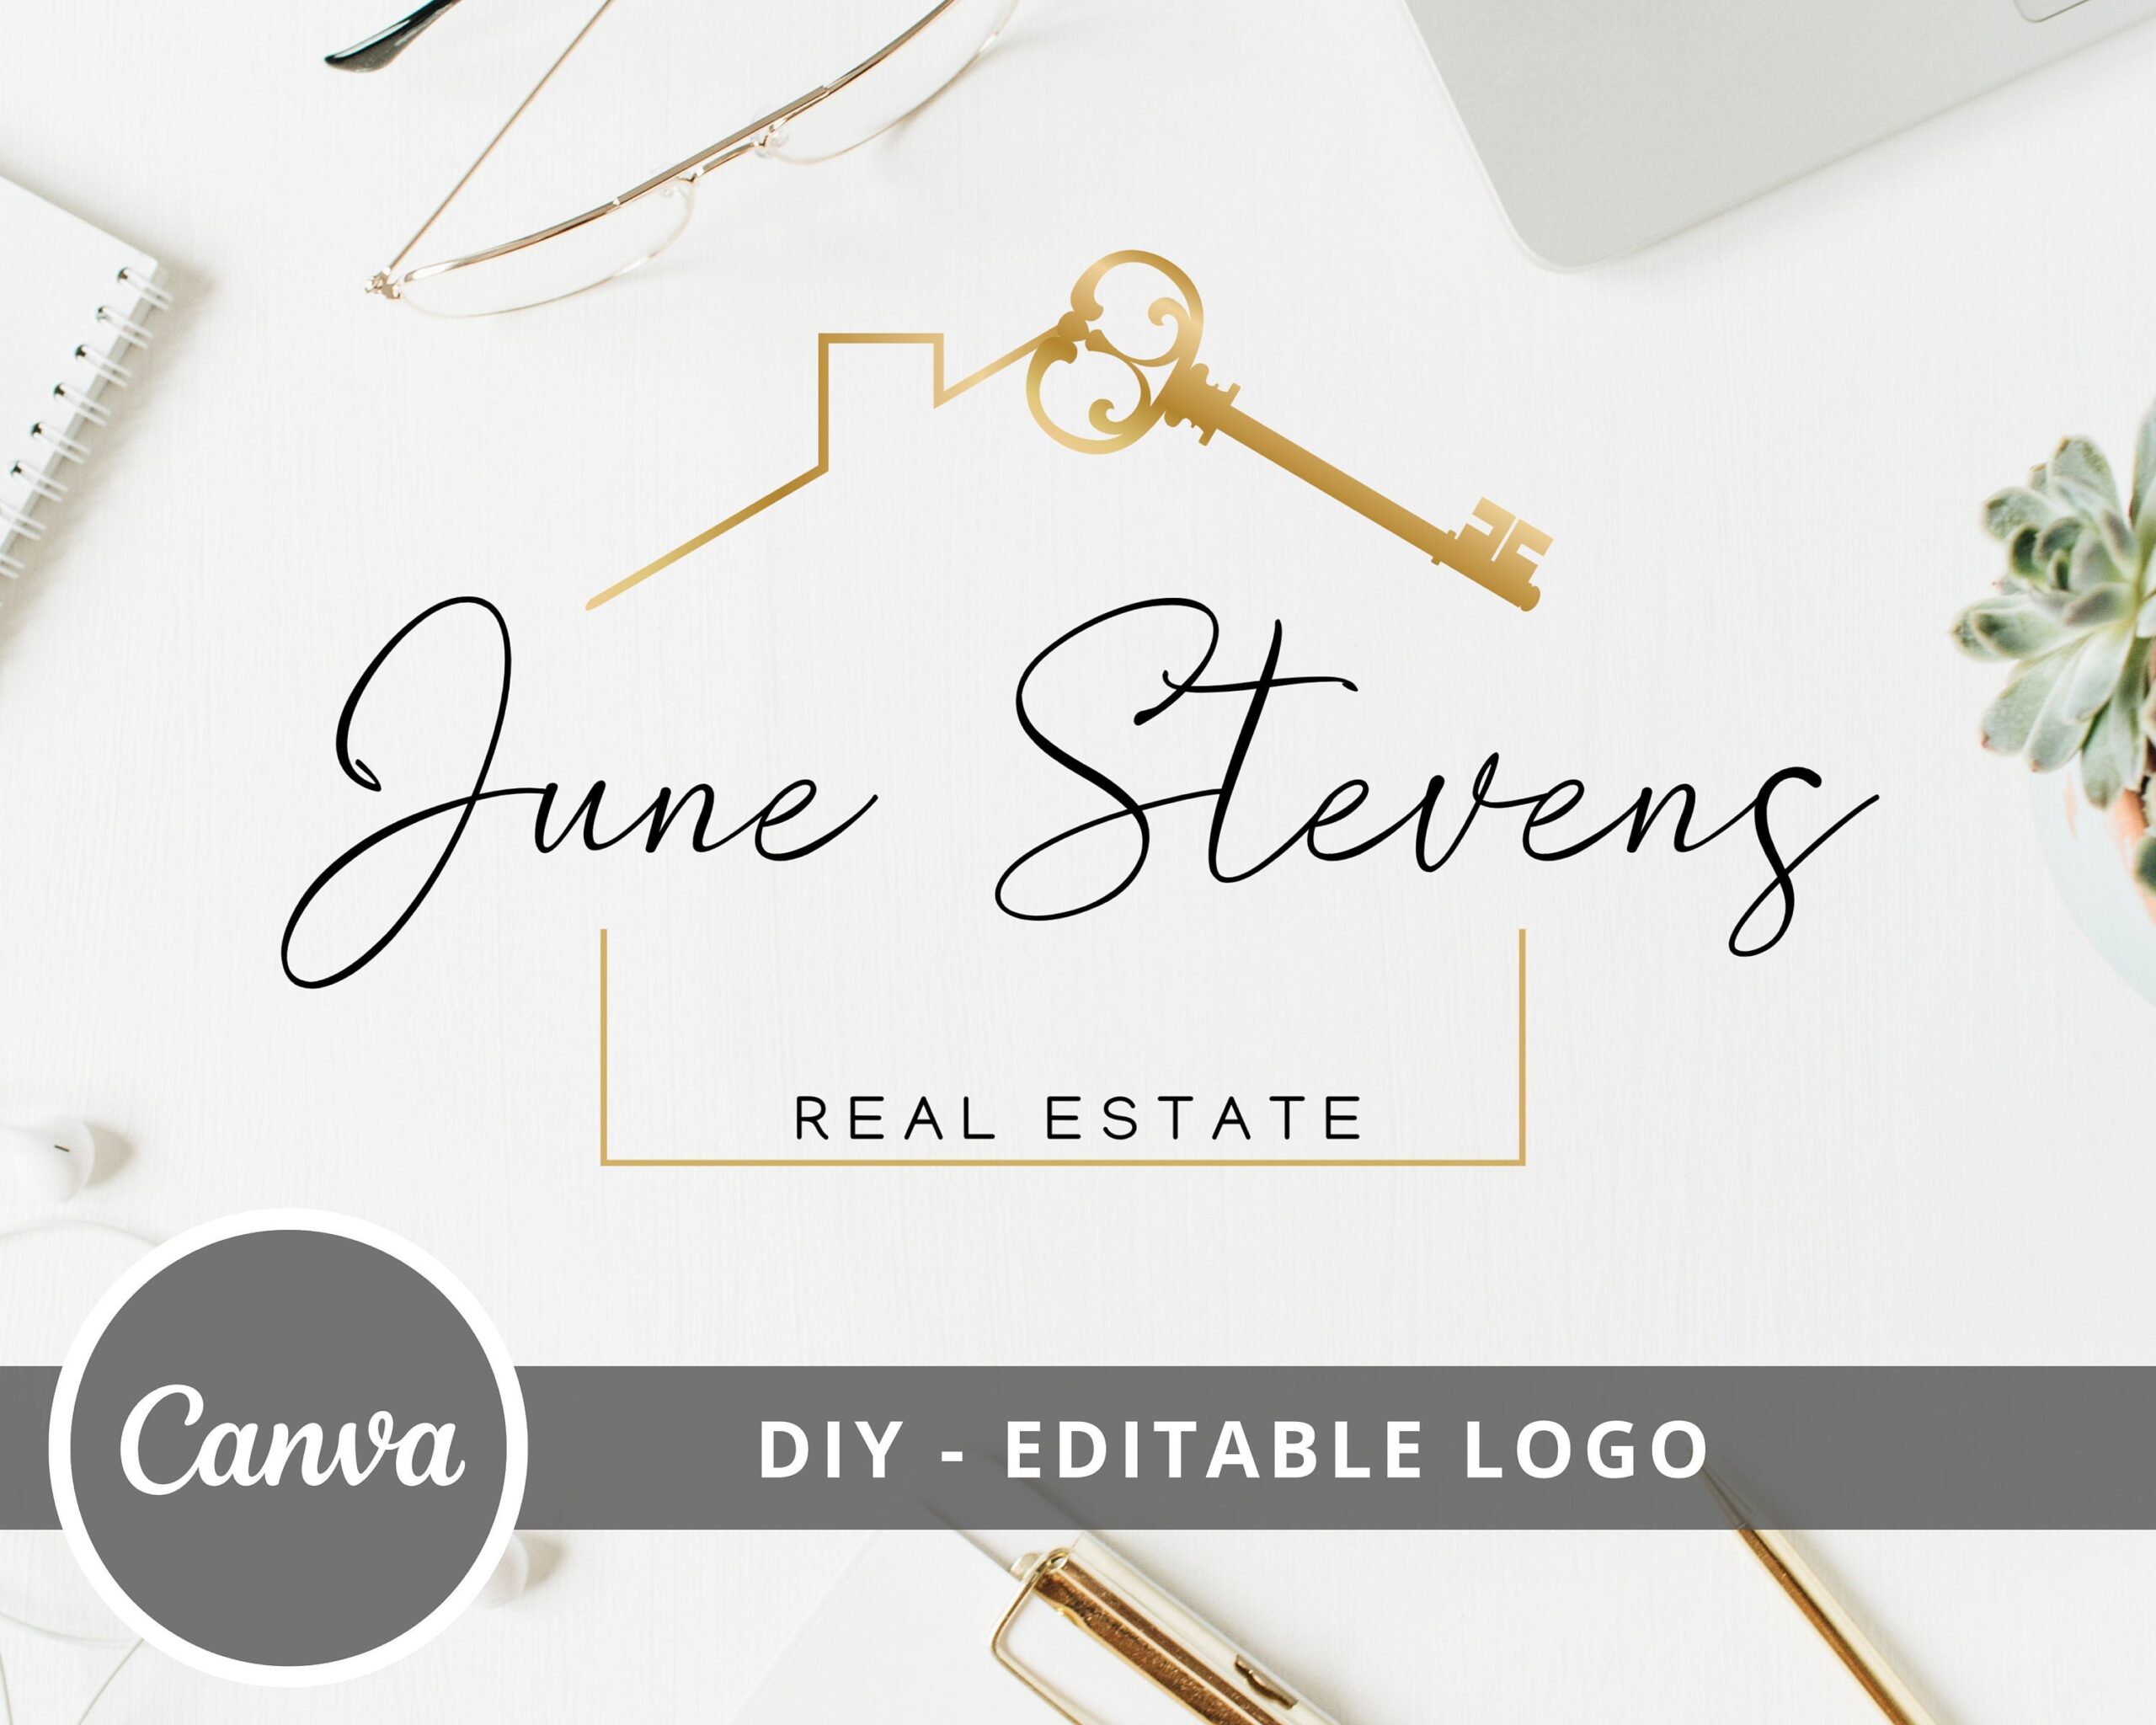 DIY Real Estate Logo Design is a business logo for agents, Fully Editable Realtor Logo, Canva Template, House and Key Logo, Instant Access